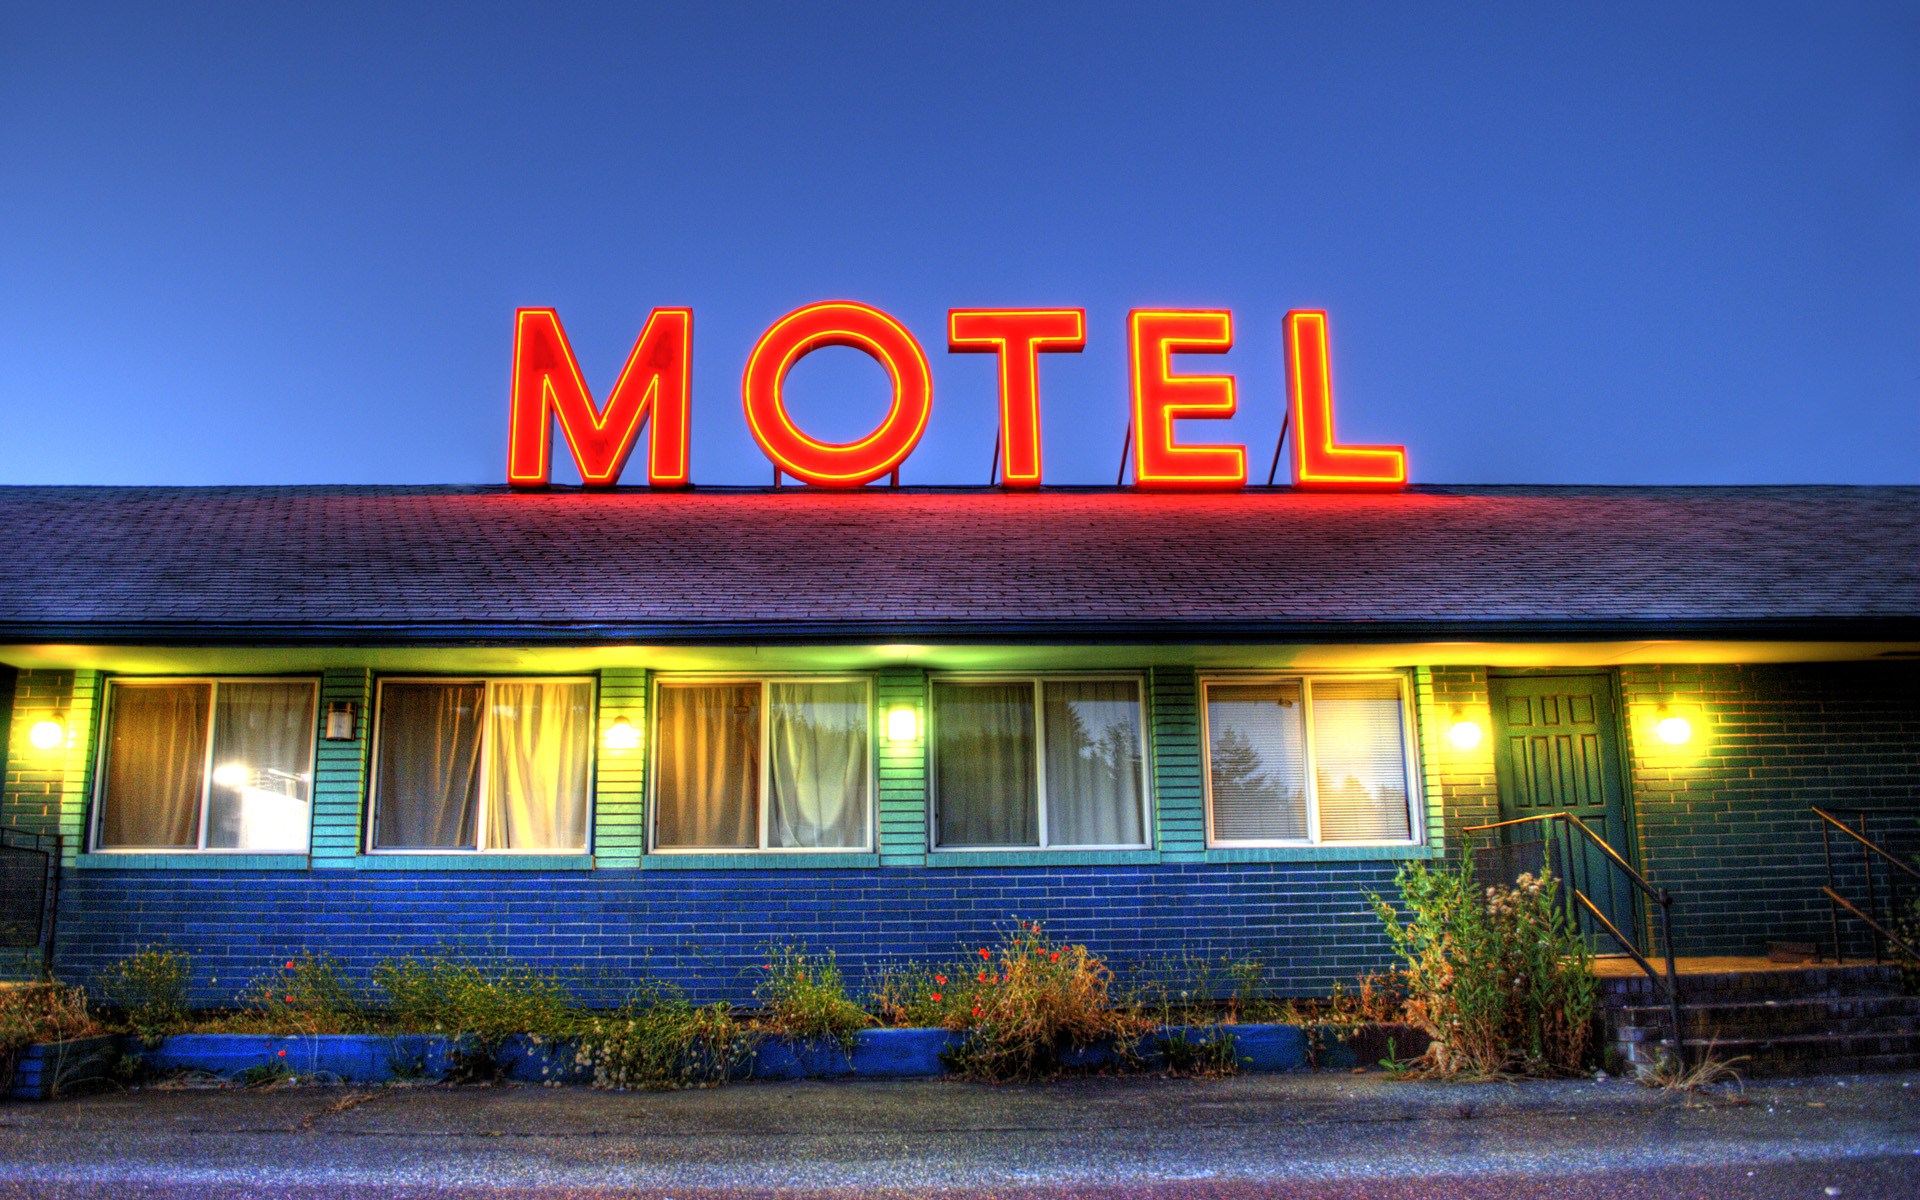 Motel- A Paradise For Loners